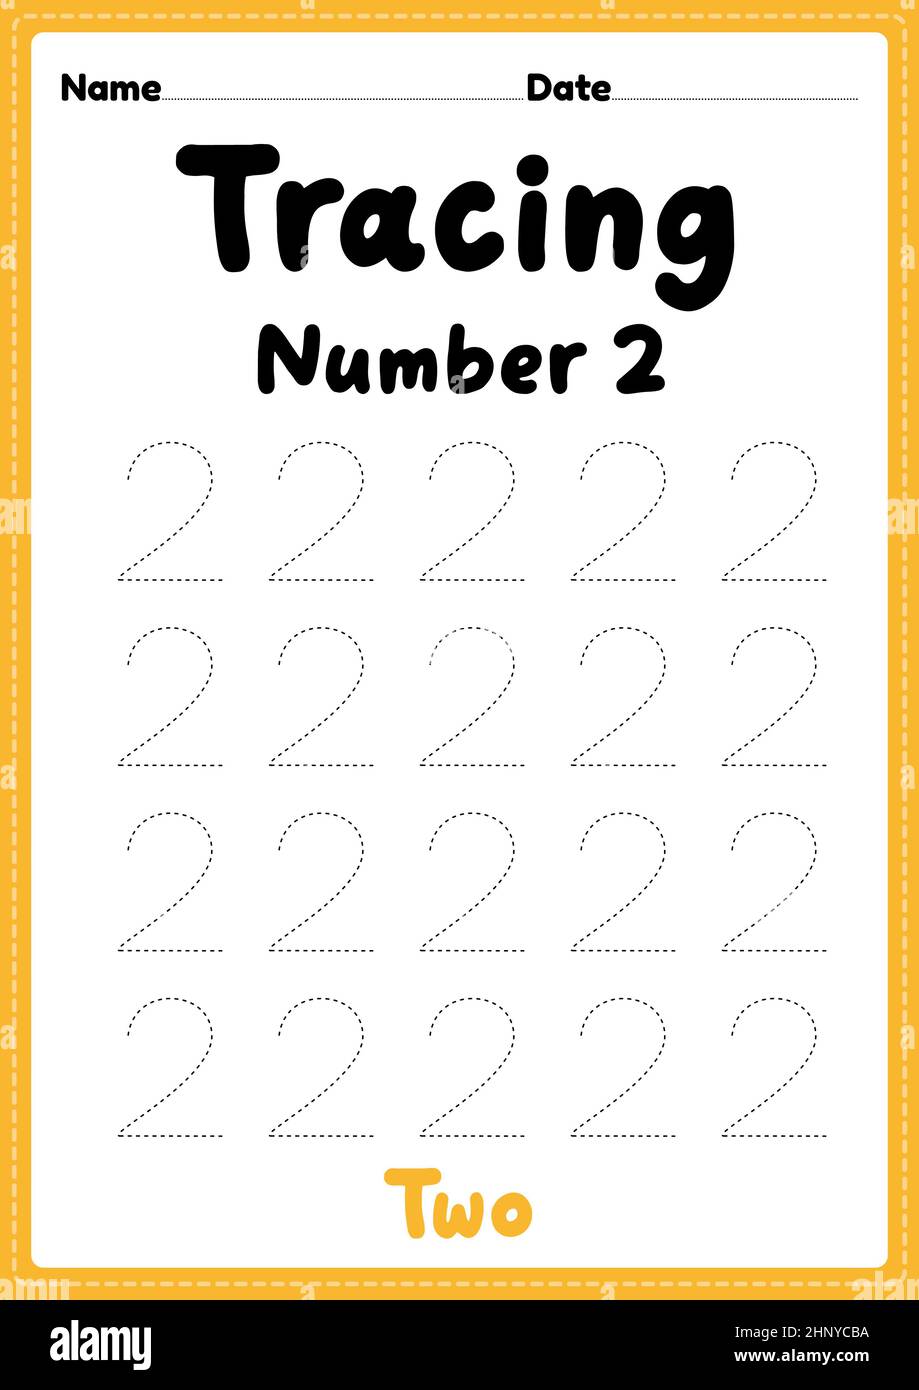 Tracing number 2 worksheet for kindergarten, preschool and Montessori kids for learning numbers and handwriting practice activities. Stock Photo